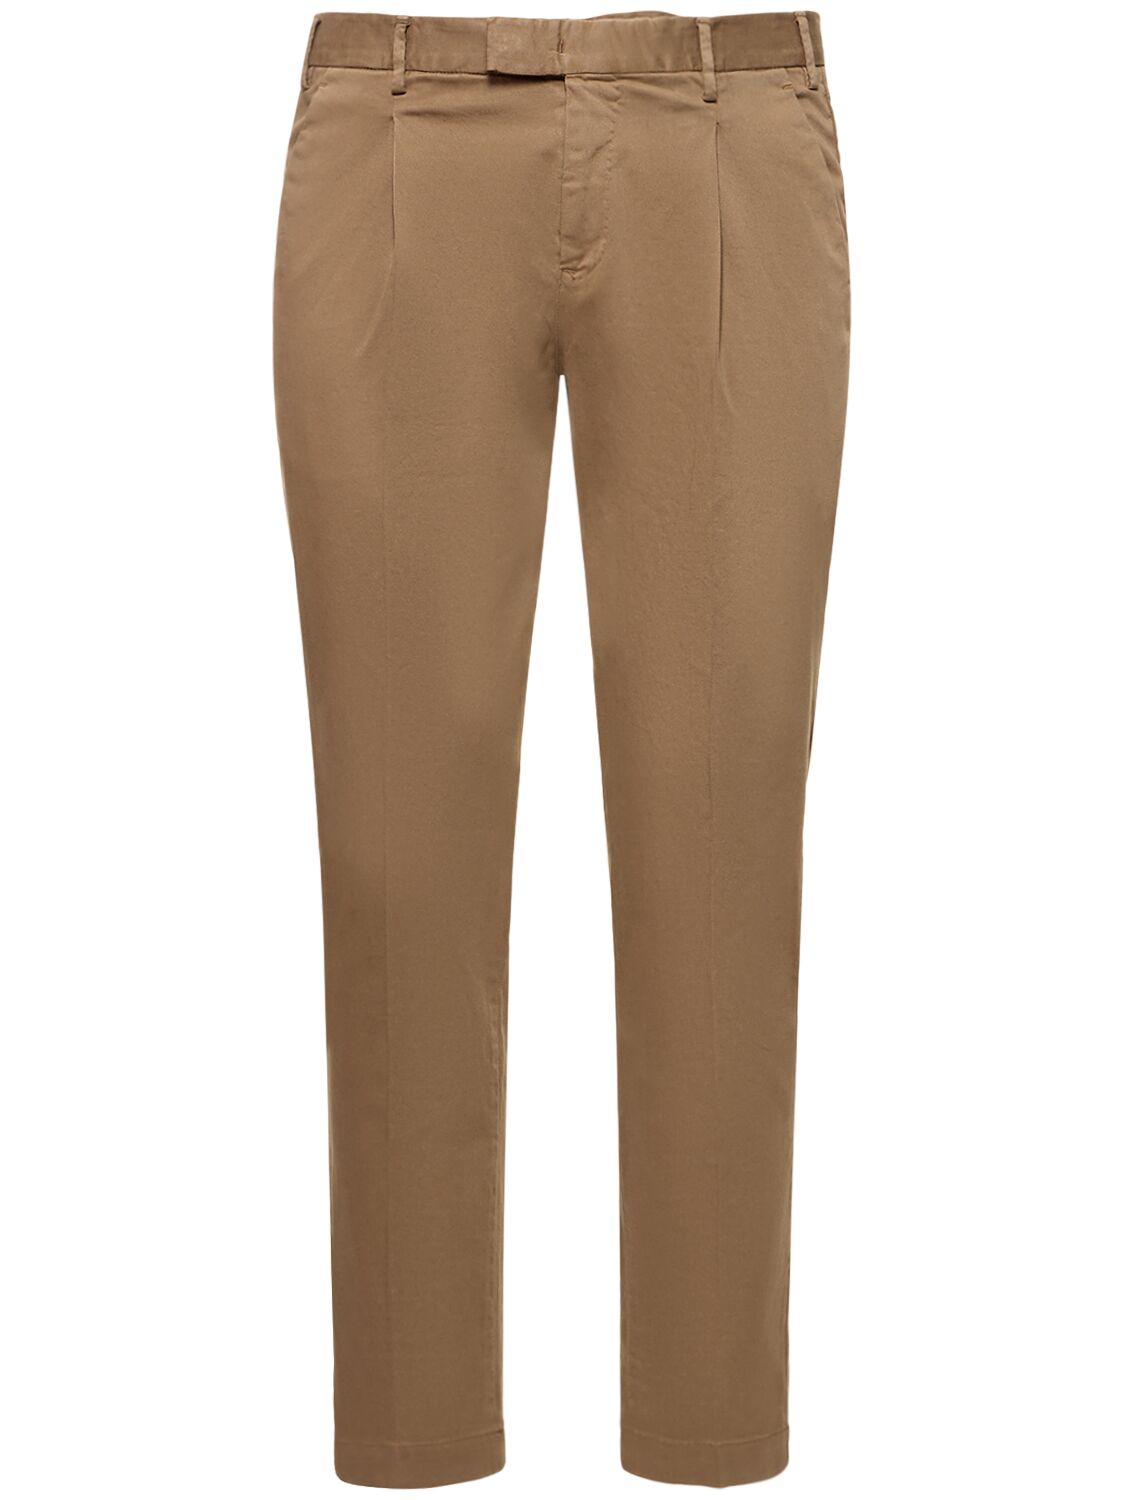 Pt Torino Stretch Cotton Pants In Brown